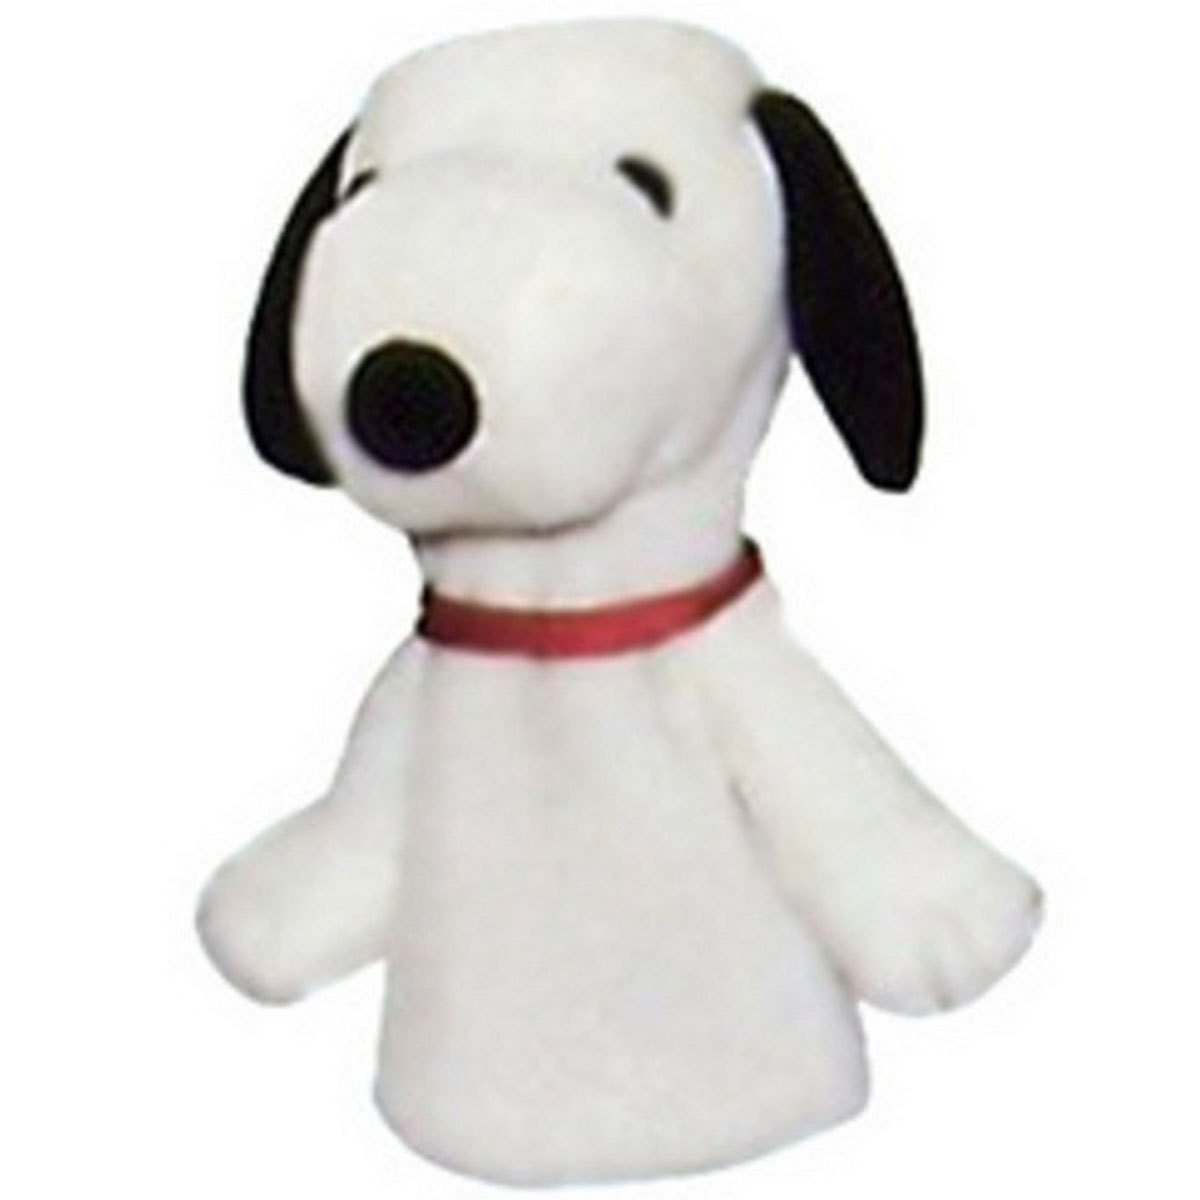 New Snoopy 460 cc Driver Headcover (JAPAN)